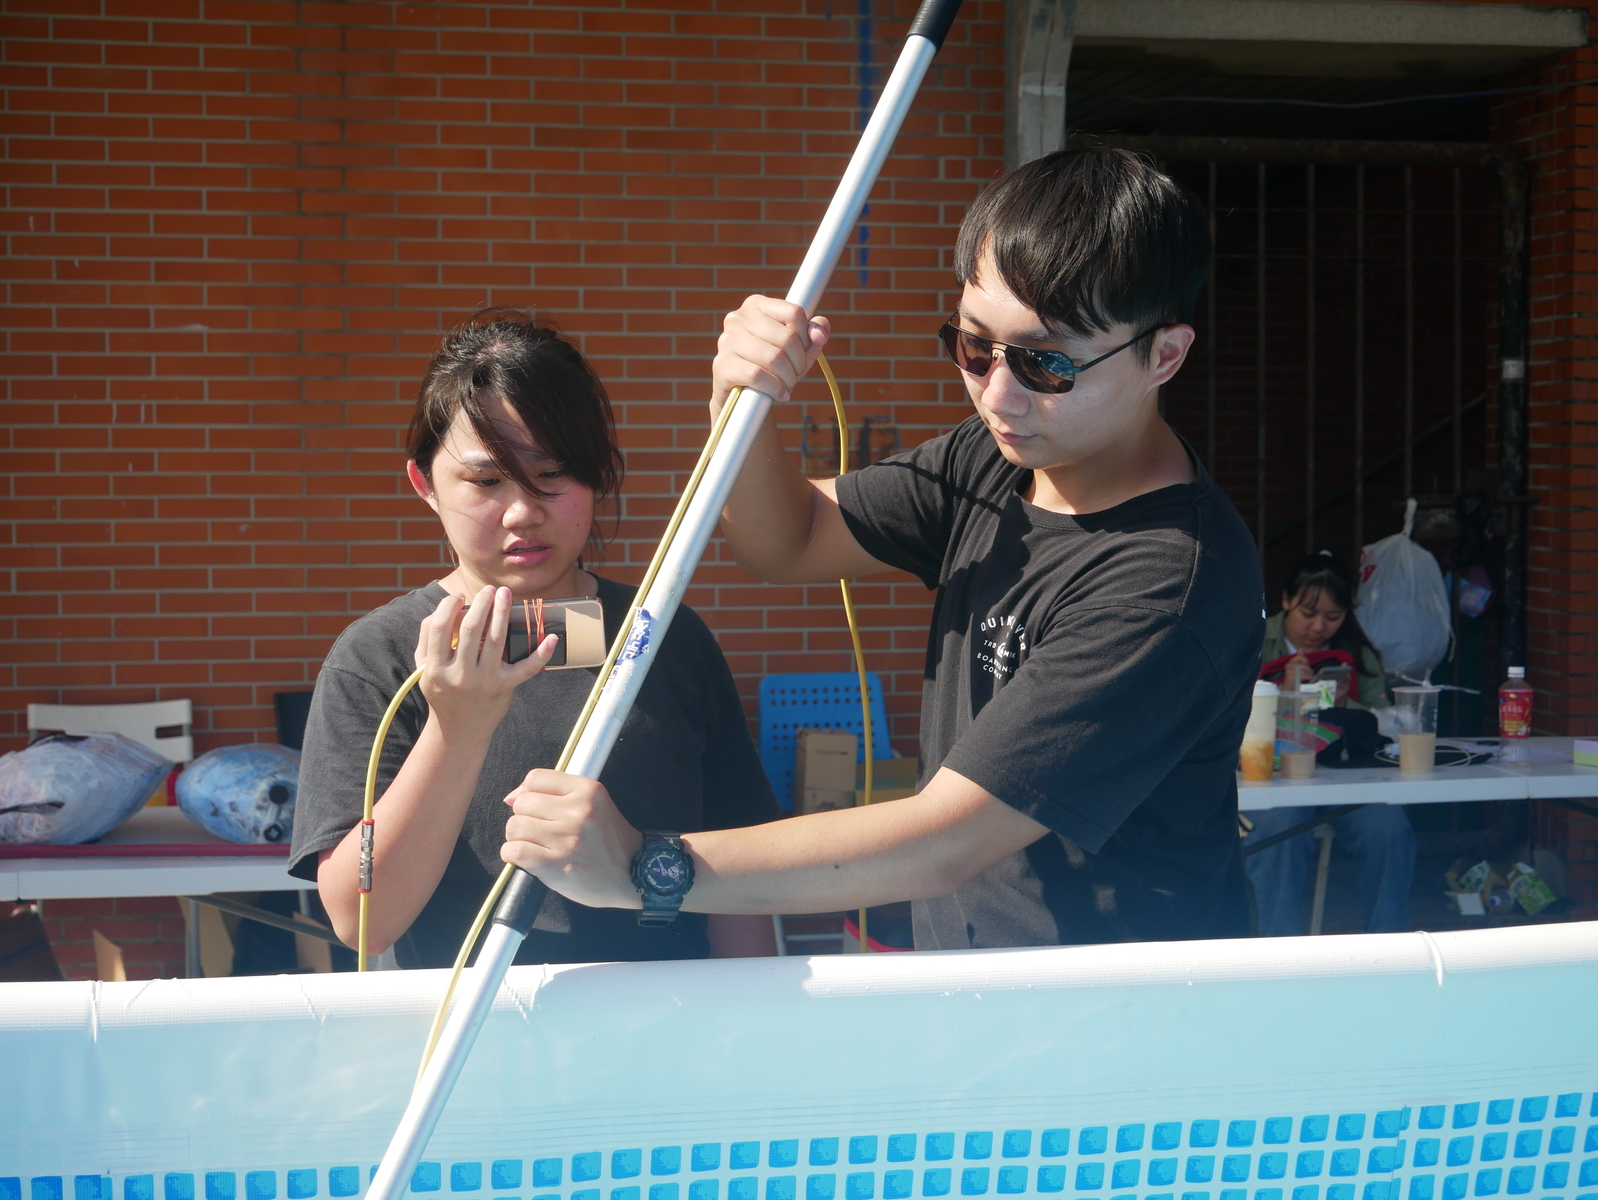 Students show off their creativity during competition for biomimetic underwater fish models